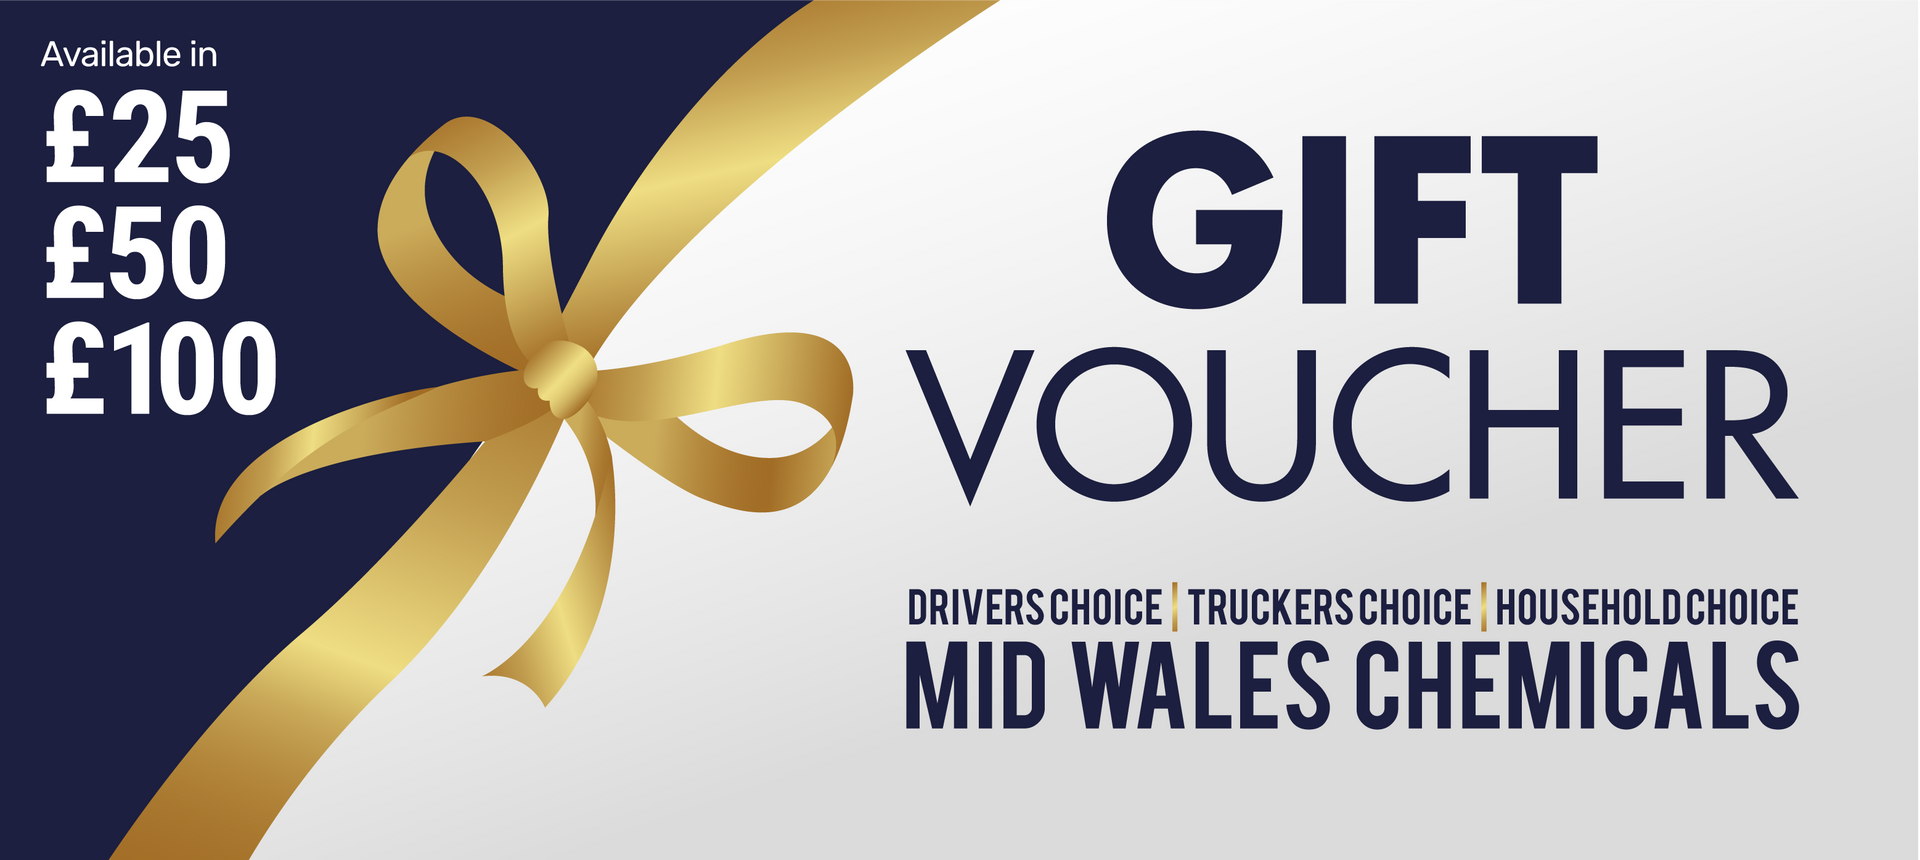 Mid Wales Chemicals Gift Voucher